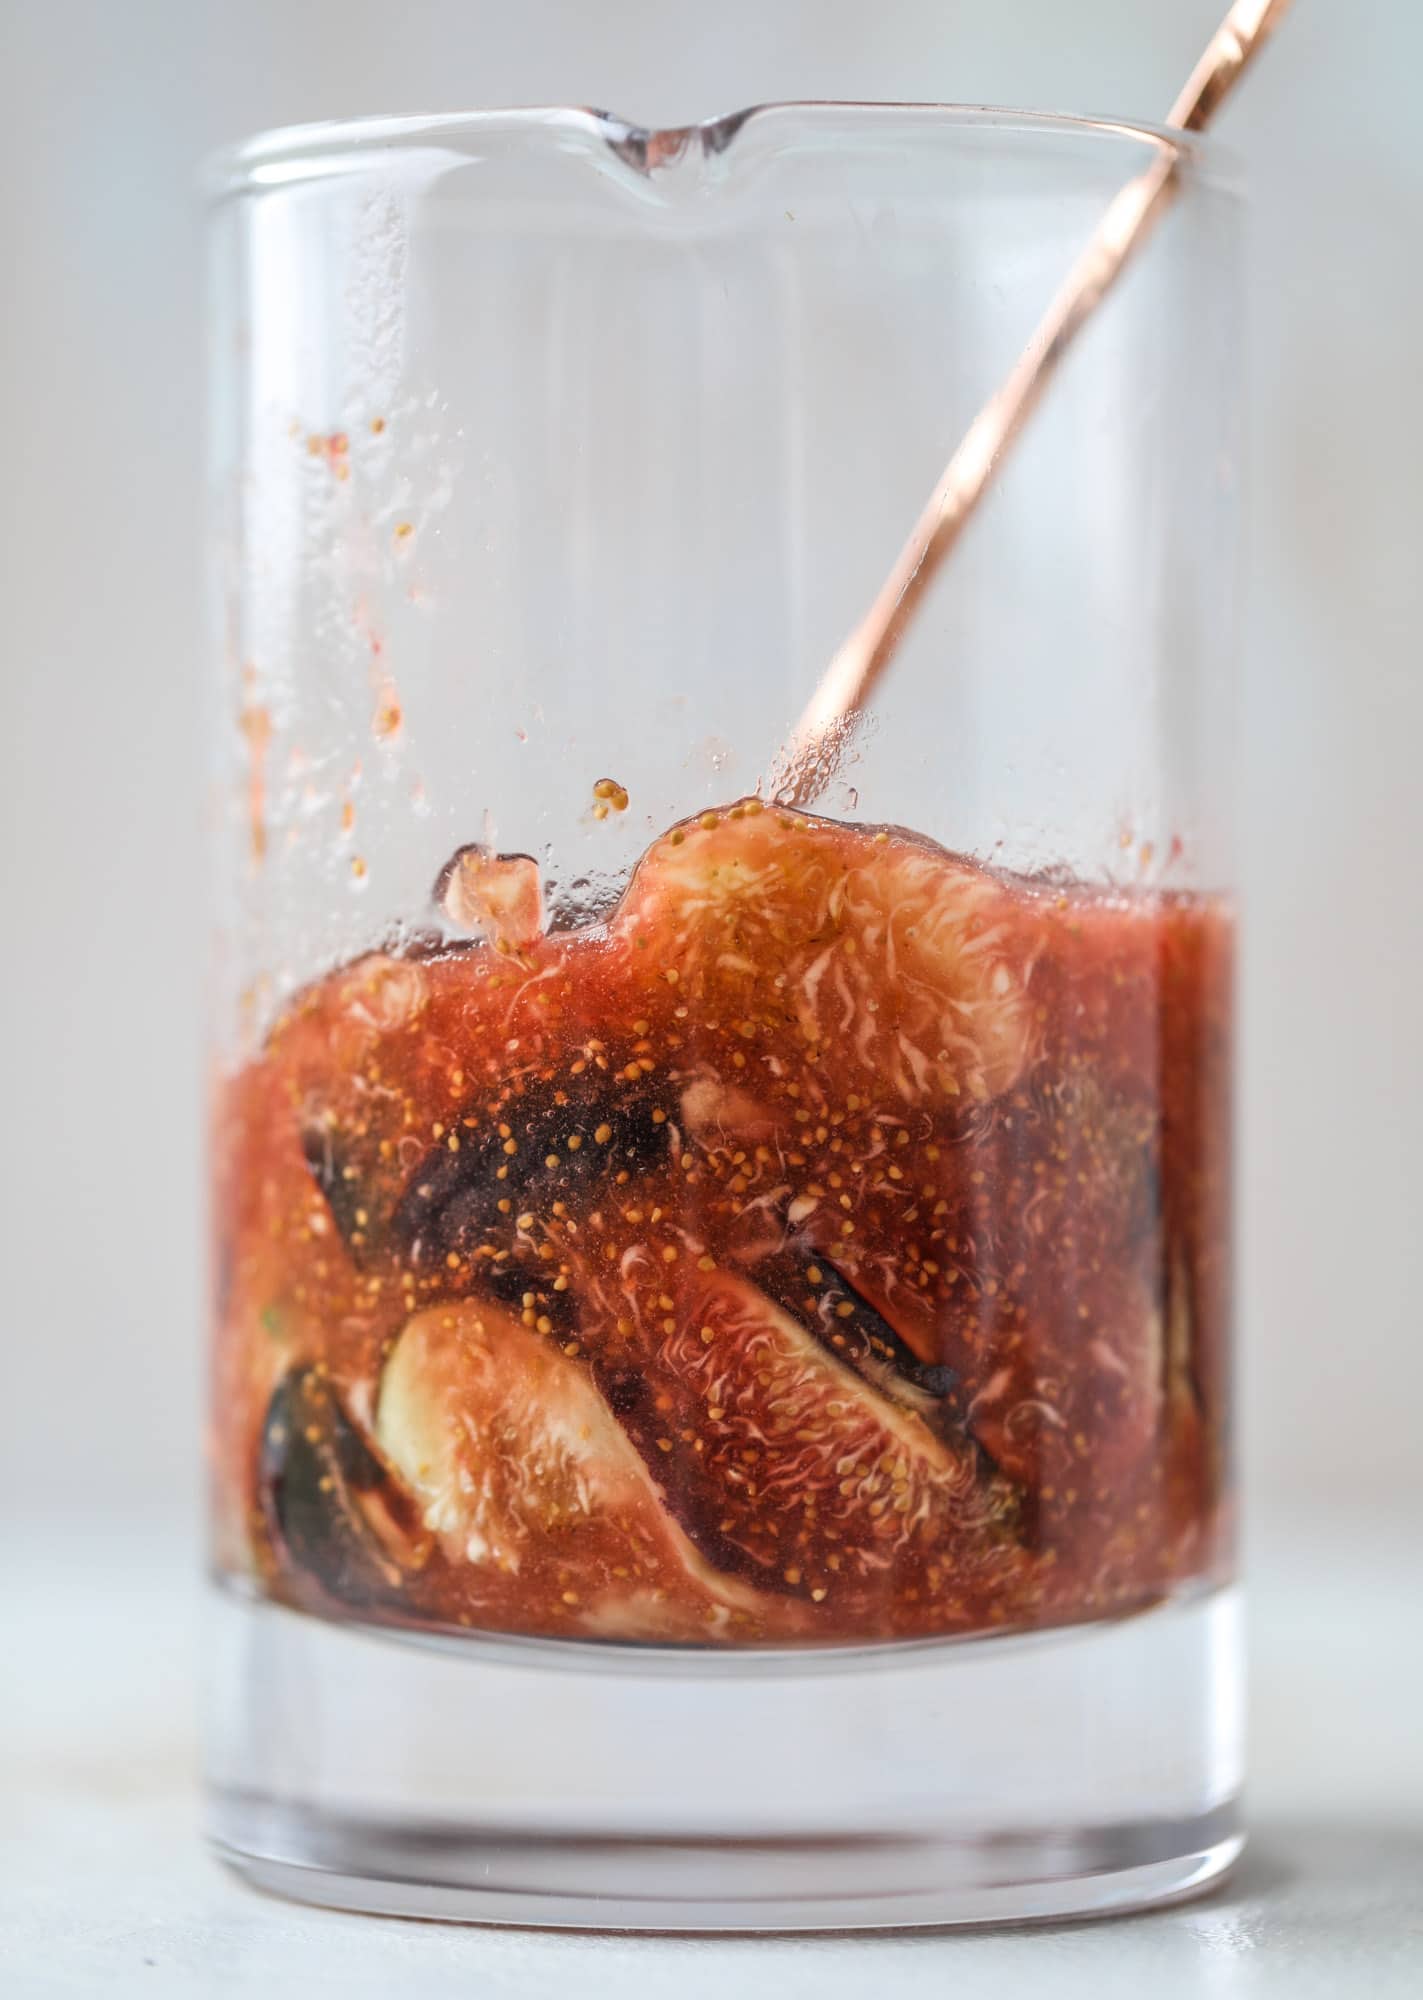 This new fig cocktail is so delicious and perfect for your fresh juicy figs! Muddle the fresh figs with brown sugar and a touch of lemon, then add them to a glass with crushed ice and pour some bubbly on top. I love Prosecco, but you can use a sweeter bubbly too! I howsweeteats.com #fig #cocktail #brown #sugar #prosecco